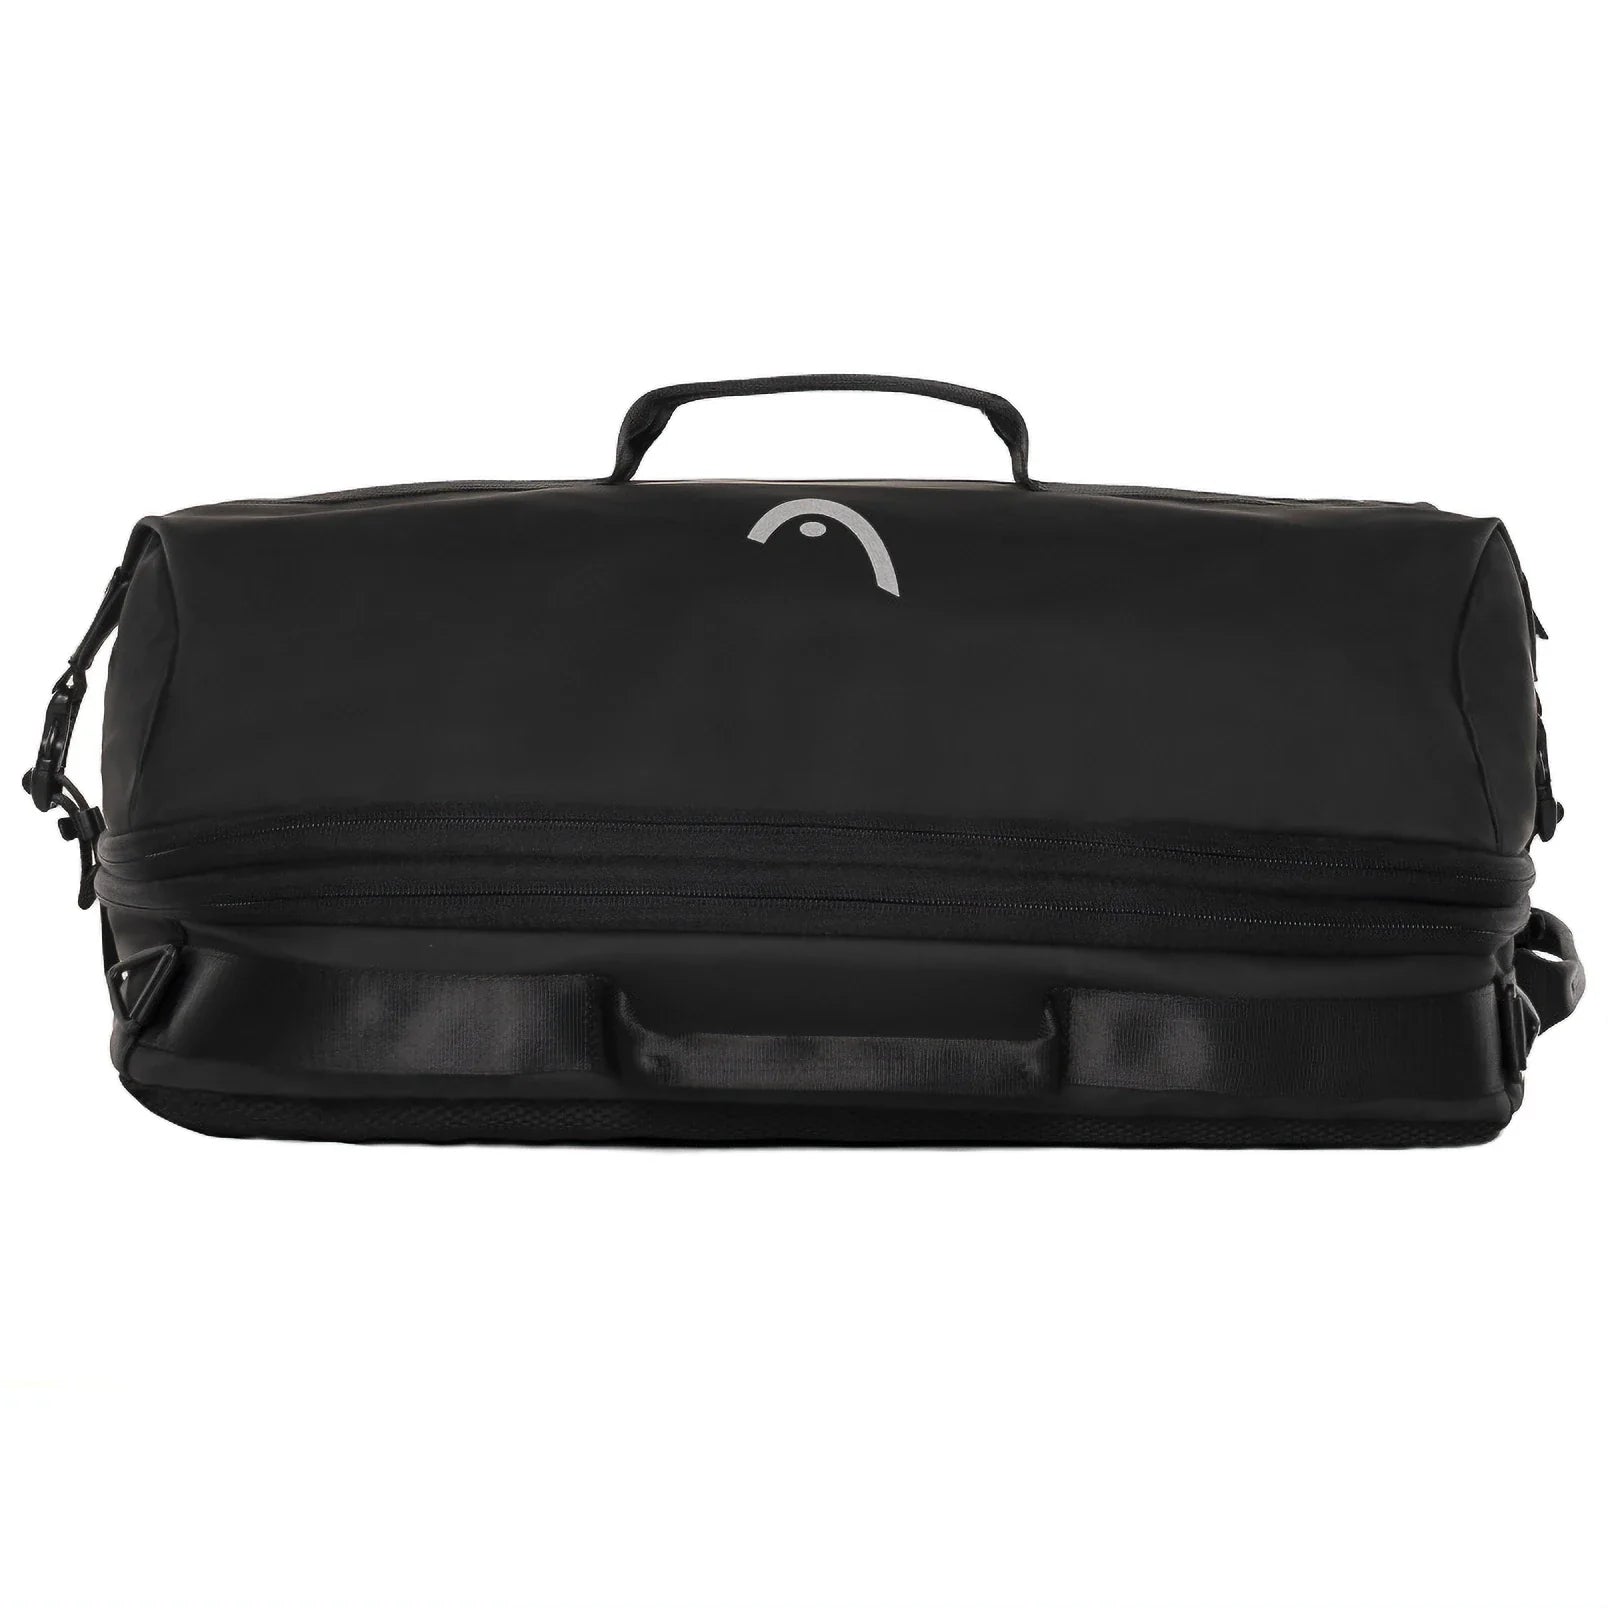 Head Out Duffle/Backpack 52 cm - Black